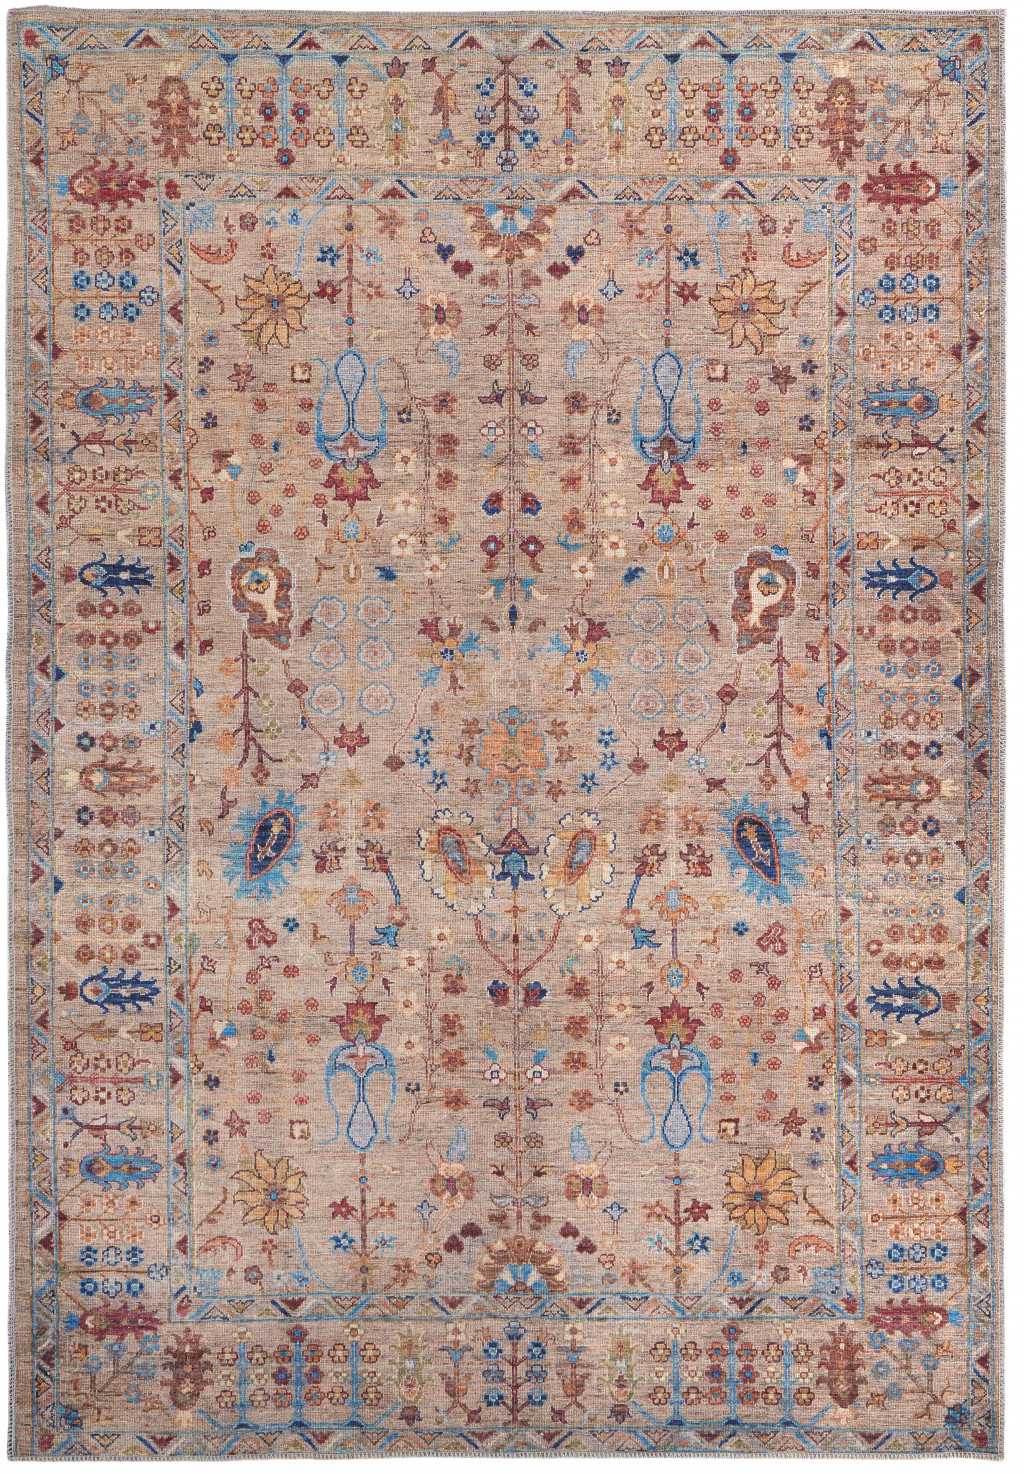 10' X 14' Tan Pink And Blue Floral Power Loom Area Rug-515165-1